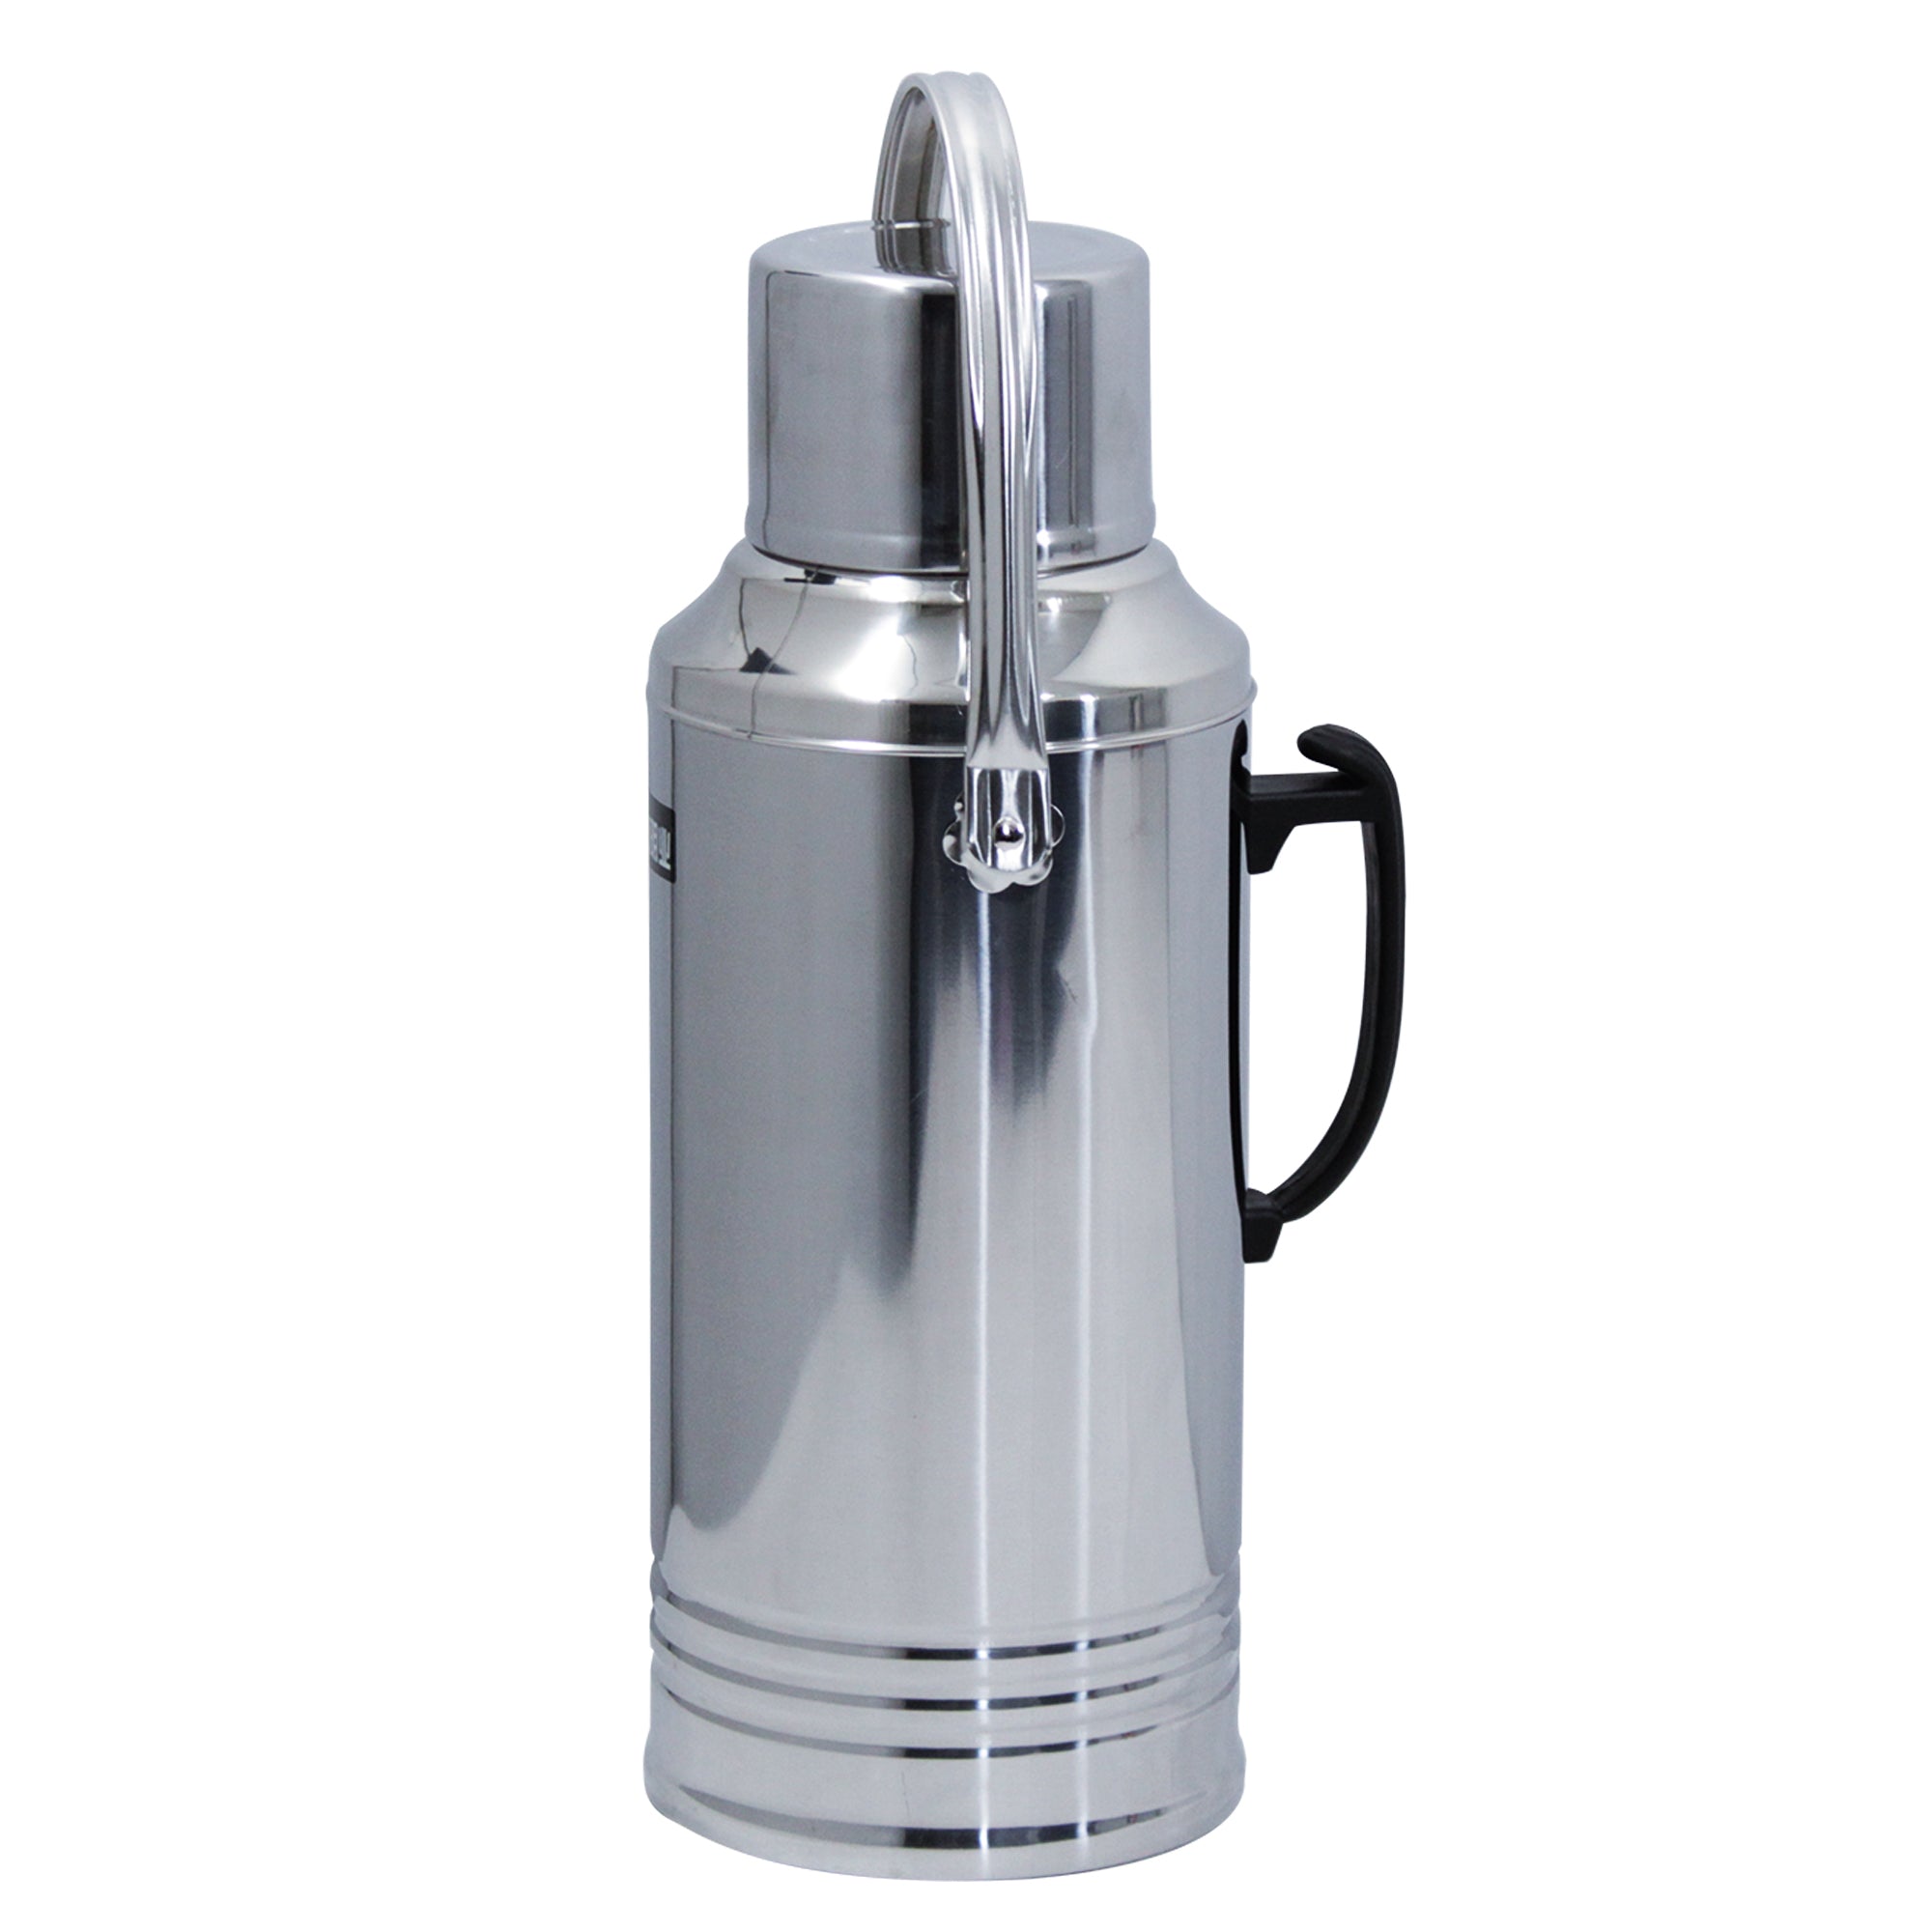 3.2L Steel Glass-Inner Vacuum Insulated Flask and 3L Stovetop Whisting Kettle